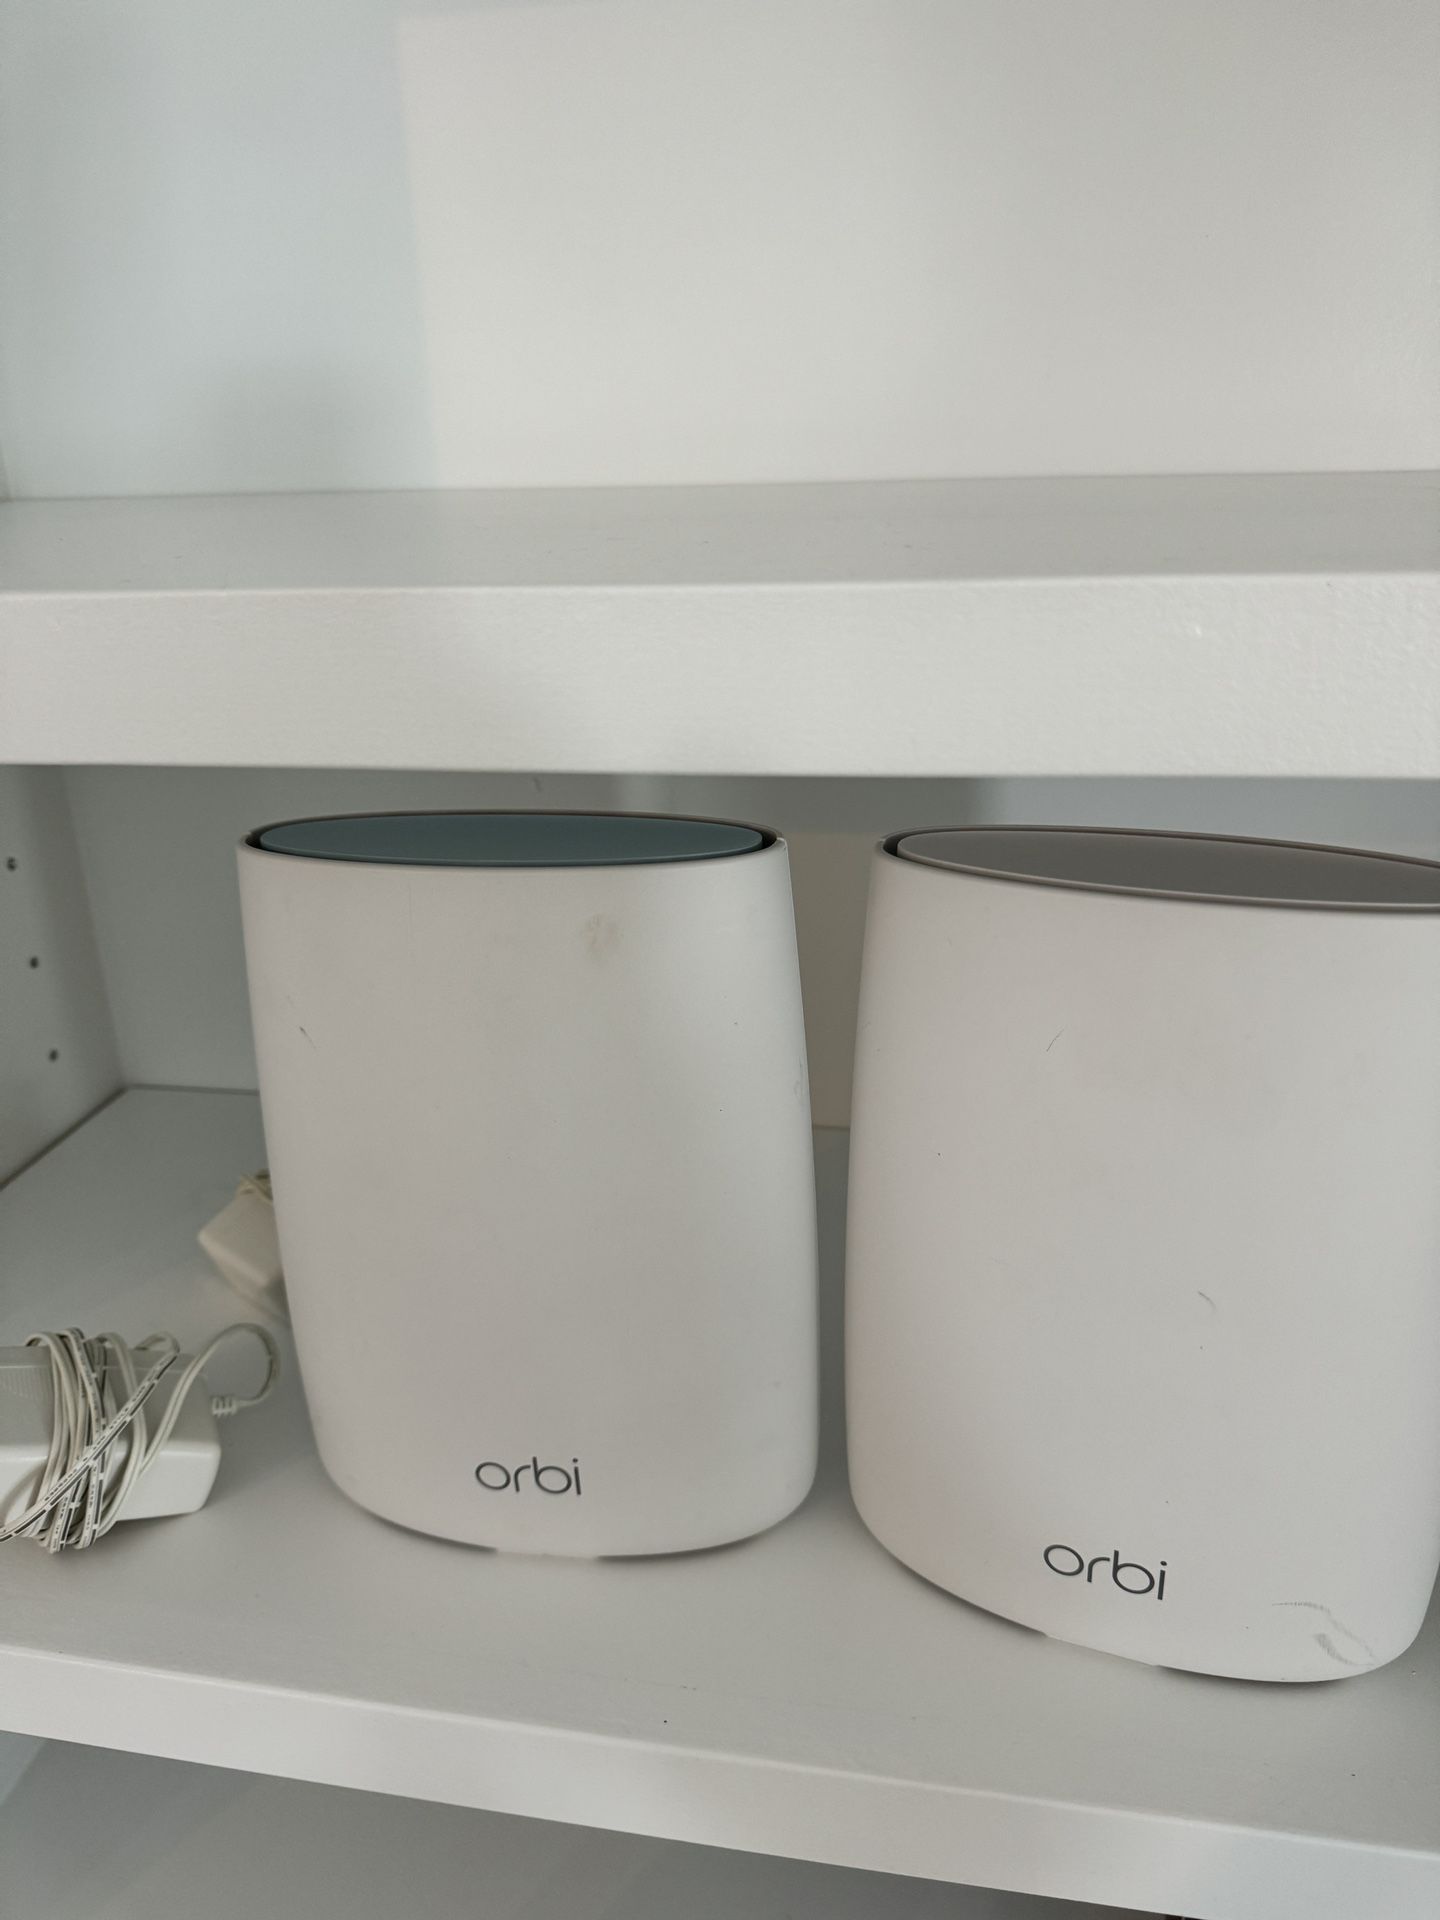 Orbi Mesh Routers